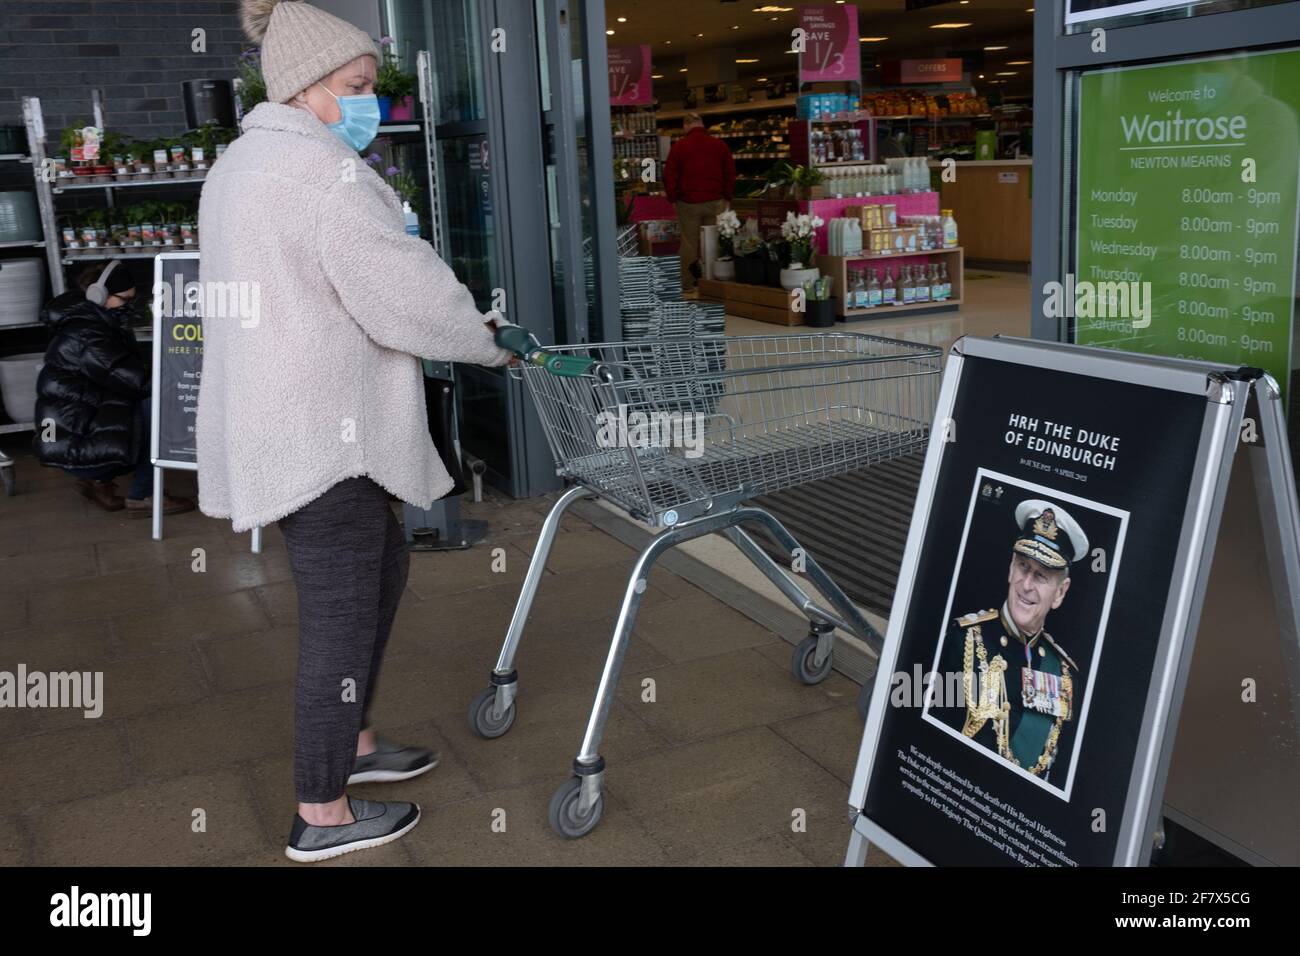 Glasgow, UK, 10th April 2021. Shoppers, wearing facemasks due to the Covid-19 CoronaVirus health pandemic, pass by a tribute to His Royal Highness Prince Philip, Duke of Edinburgh, displayed outside a Waitrose supermarket, as the nation mourns his death at the age of 99-years. Photo credit: Jeremy Sutton-Hibbert/Alamy Live News Stock Photo